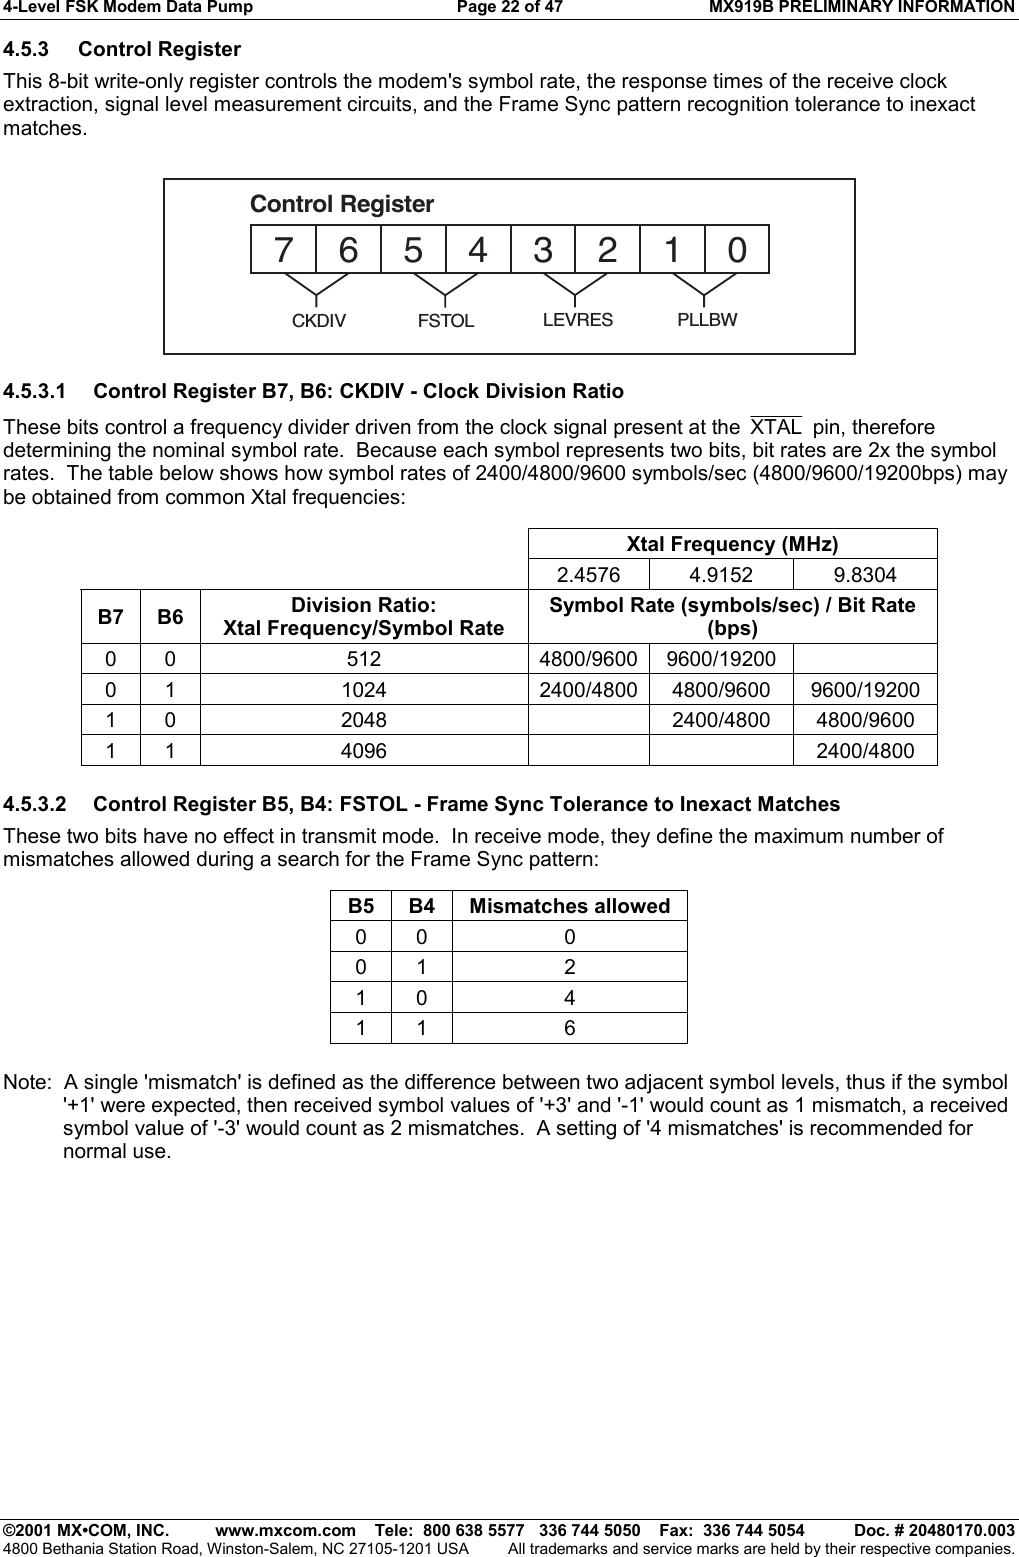 4-Level FSK Modem Data Pump  Page 22 of 47  MX919B PRELIMINARY INFORMATION   ©2001 MX•COM, INC.  www.mxcom.com    Tele:  800 638 5577   336 744 5050    Fax:  336 744 5054  Doc. # 20480170.003 4800 Bethania Station Road, Winston-Salem, NC 27105-1201 USA  All trademarks and service marks are held by their respective companies. 4.5.3 Control Register This 8-bit write-only register controls the modem&apos;s symbol rate, the response times of the receive clock extraction, signal level measurement circuits, and the Frame Sync pattern recognition tolerance to inexact matches. 76543210Control RegisterFSTOL LEVRES PLLBWCKDIV 4.5.3.1  Control Register B7, B6: CKDIV - Clock Division Ratio These bits control a frequency divider driven from the clock signal present at the  XTAL  pin, therefore determining the nominal symbol rate.  Because each symbol represents two bits, bit rates are 2x the symbol rates.  The table below shows how symbol rates of 2400/4800/9600 symbols/sec (4800/9600/19200bps) may be obtained from common Xtal frequencies:        Xtal Frequency (MHz)      2.4576  4.9152  9.8304 B7 B6  Division Ratio: Xtal Frequency/Symbol Rate Symbol Rate (symbols/sec) / Bit Rate (bps) 0 0  512  4800/9600 9600/19200   0 1  1024  2400/4800 4800/9600 9600/19200 1 0  2048    2400/4800 4800/9600 1 1  4096      2400/4800  4.5.3.2  Control Register B5, B4: FSTOL - Frame Sync Tolerance to Inexact Matches These two bits have no effect in transmit mode.  In receive mode, they define the maximum number of mismatches allowed during a search for the Frame Sync pattern:  B5 B4 Mismatches allowed 0 0  0 0 1  2 1 0  4 1 1  6  Note:  A single &apos;mismatch&apos; is defined as the difference between two adjacent symbol levels, thus if the symbol &apos;+1&apos; were expected, then received symbol values of &apos;+3&apos; and &apos;-1&apos; would count as 1 mismatch, a received symbol value of &apos;-3&apos; would count as 2 mismatches.  A setting of &apos;4 mismatches&apos; is recommended for normal use. 